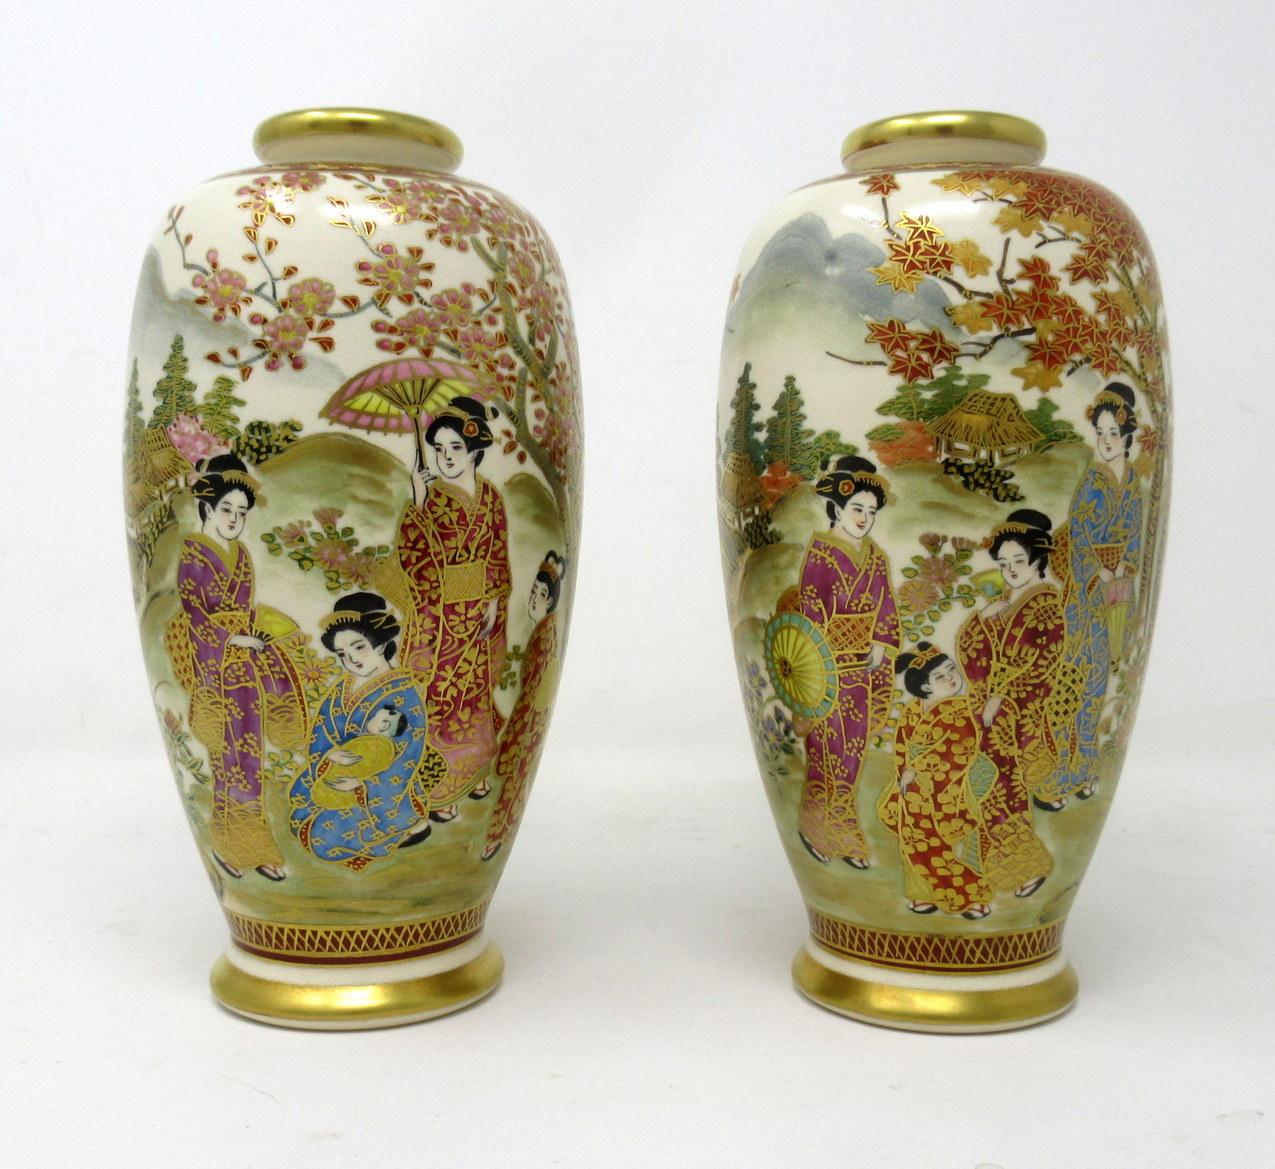 An exceptionally fine pair of japanese Satsuma hand painted porcelain vases of outstanding quality. First quarter of the twentieth century, late Meiji Period.

Of ovoid form, each hand painted in a garden setting with a continuous scene of